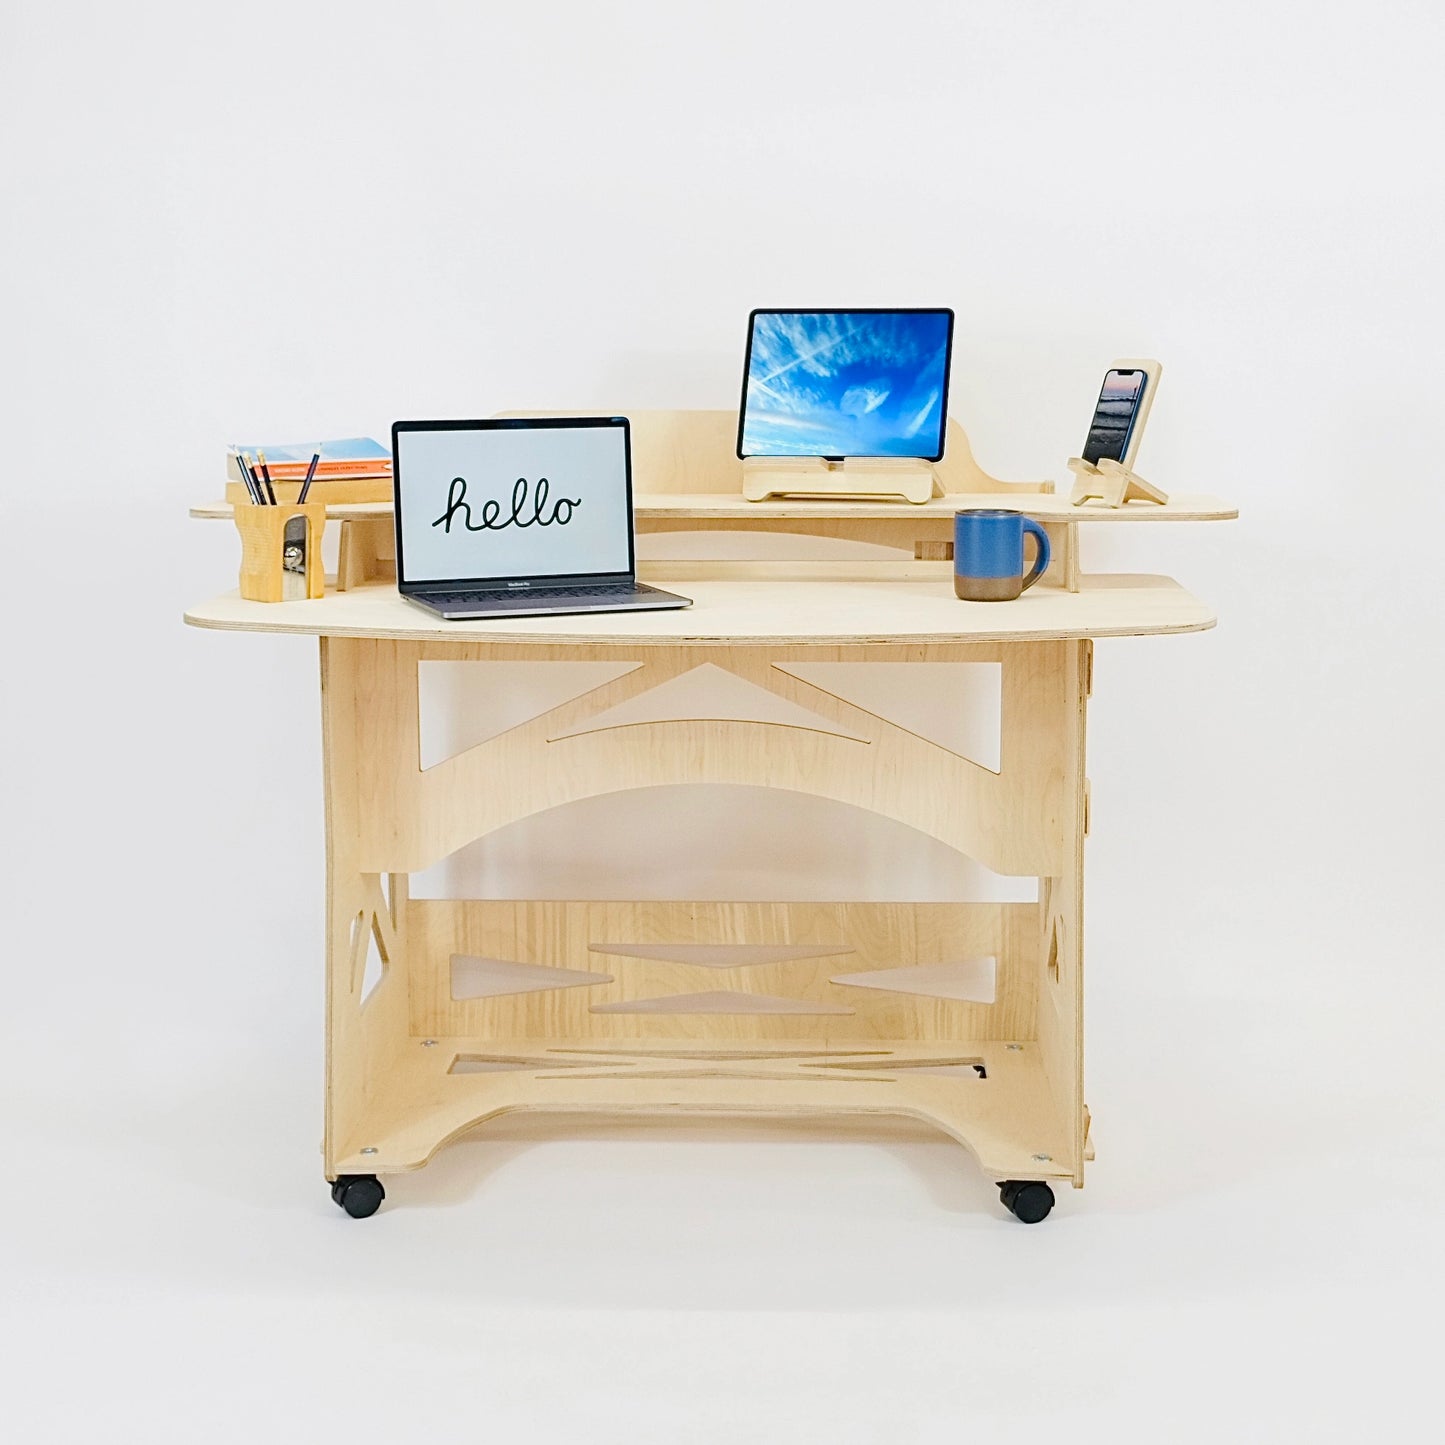 A pale wooden desk sits facing front on, it has castors. It has two computers, a mug, a pen pot , books and phone on stand sitting on top of it. 